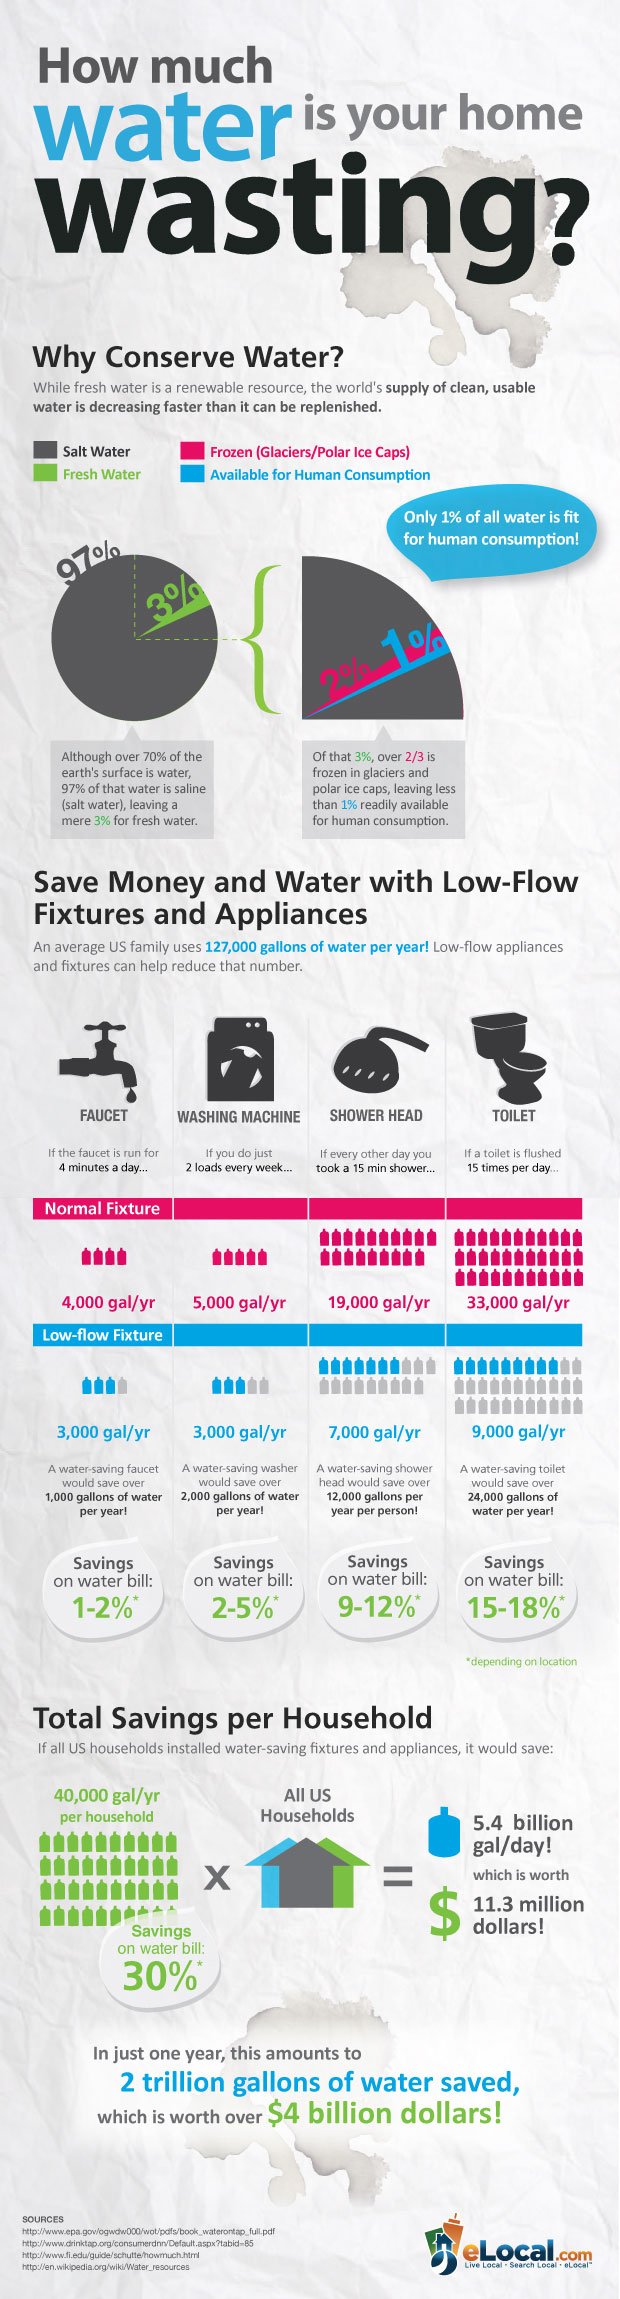 How Much Water is your Home Wasting?